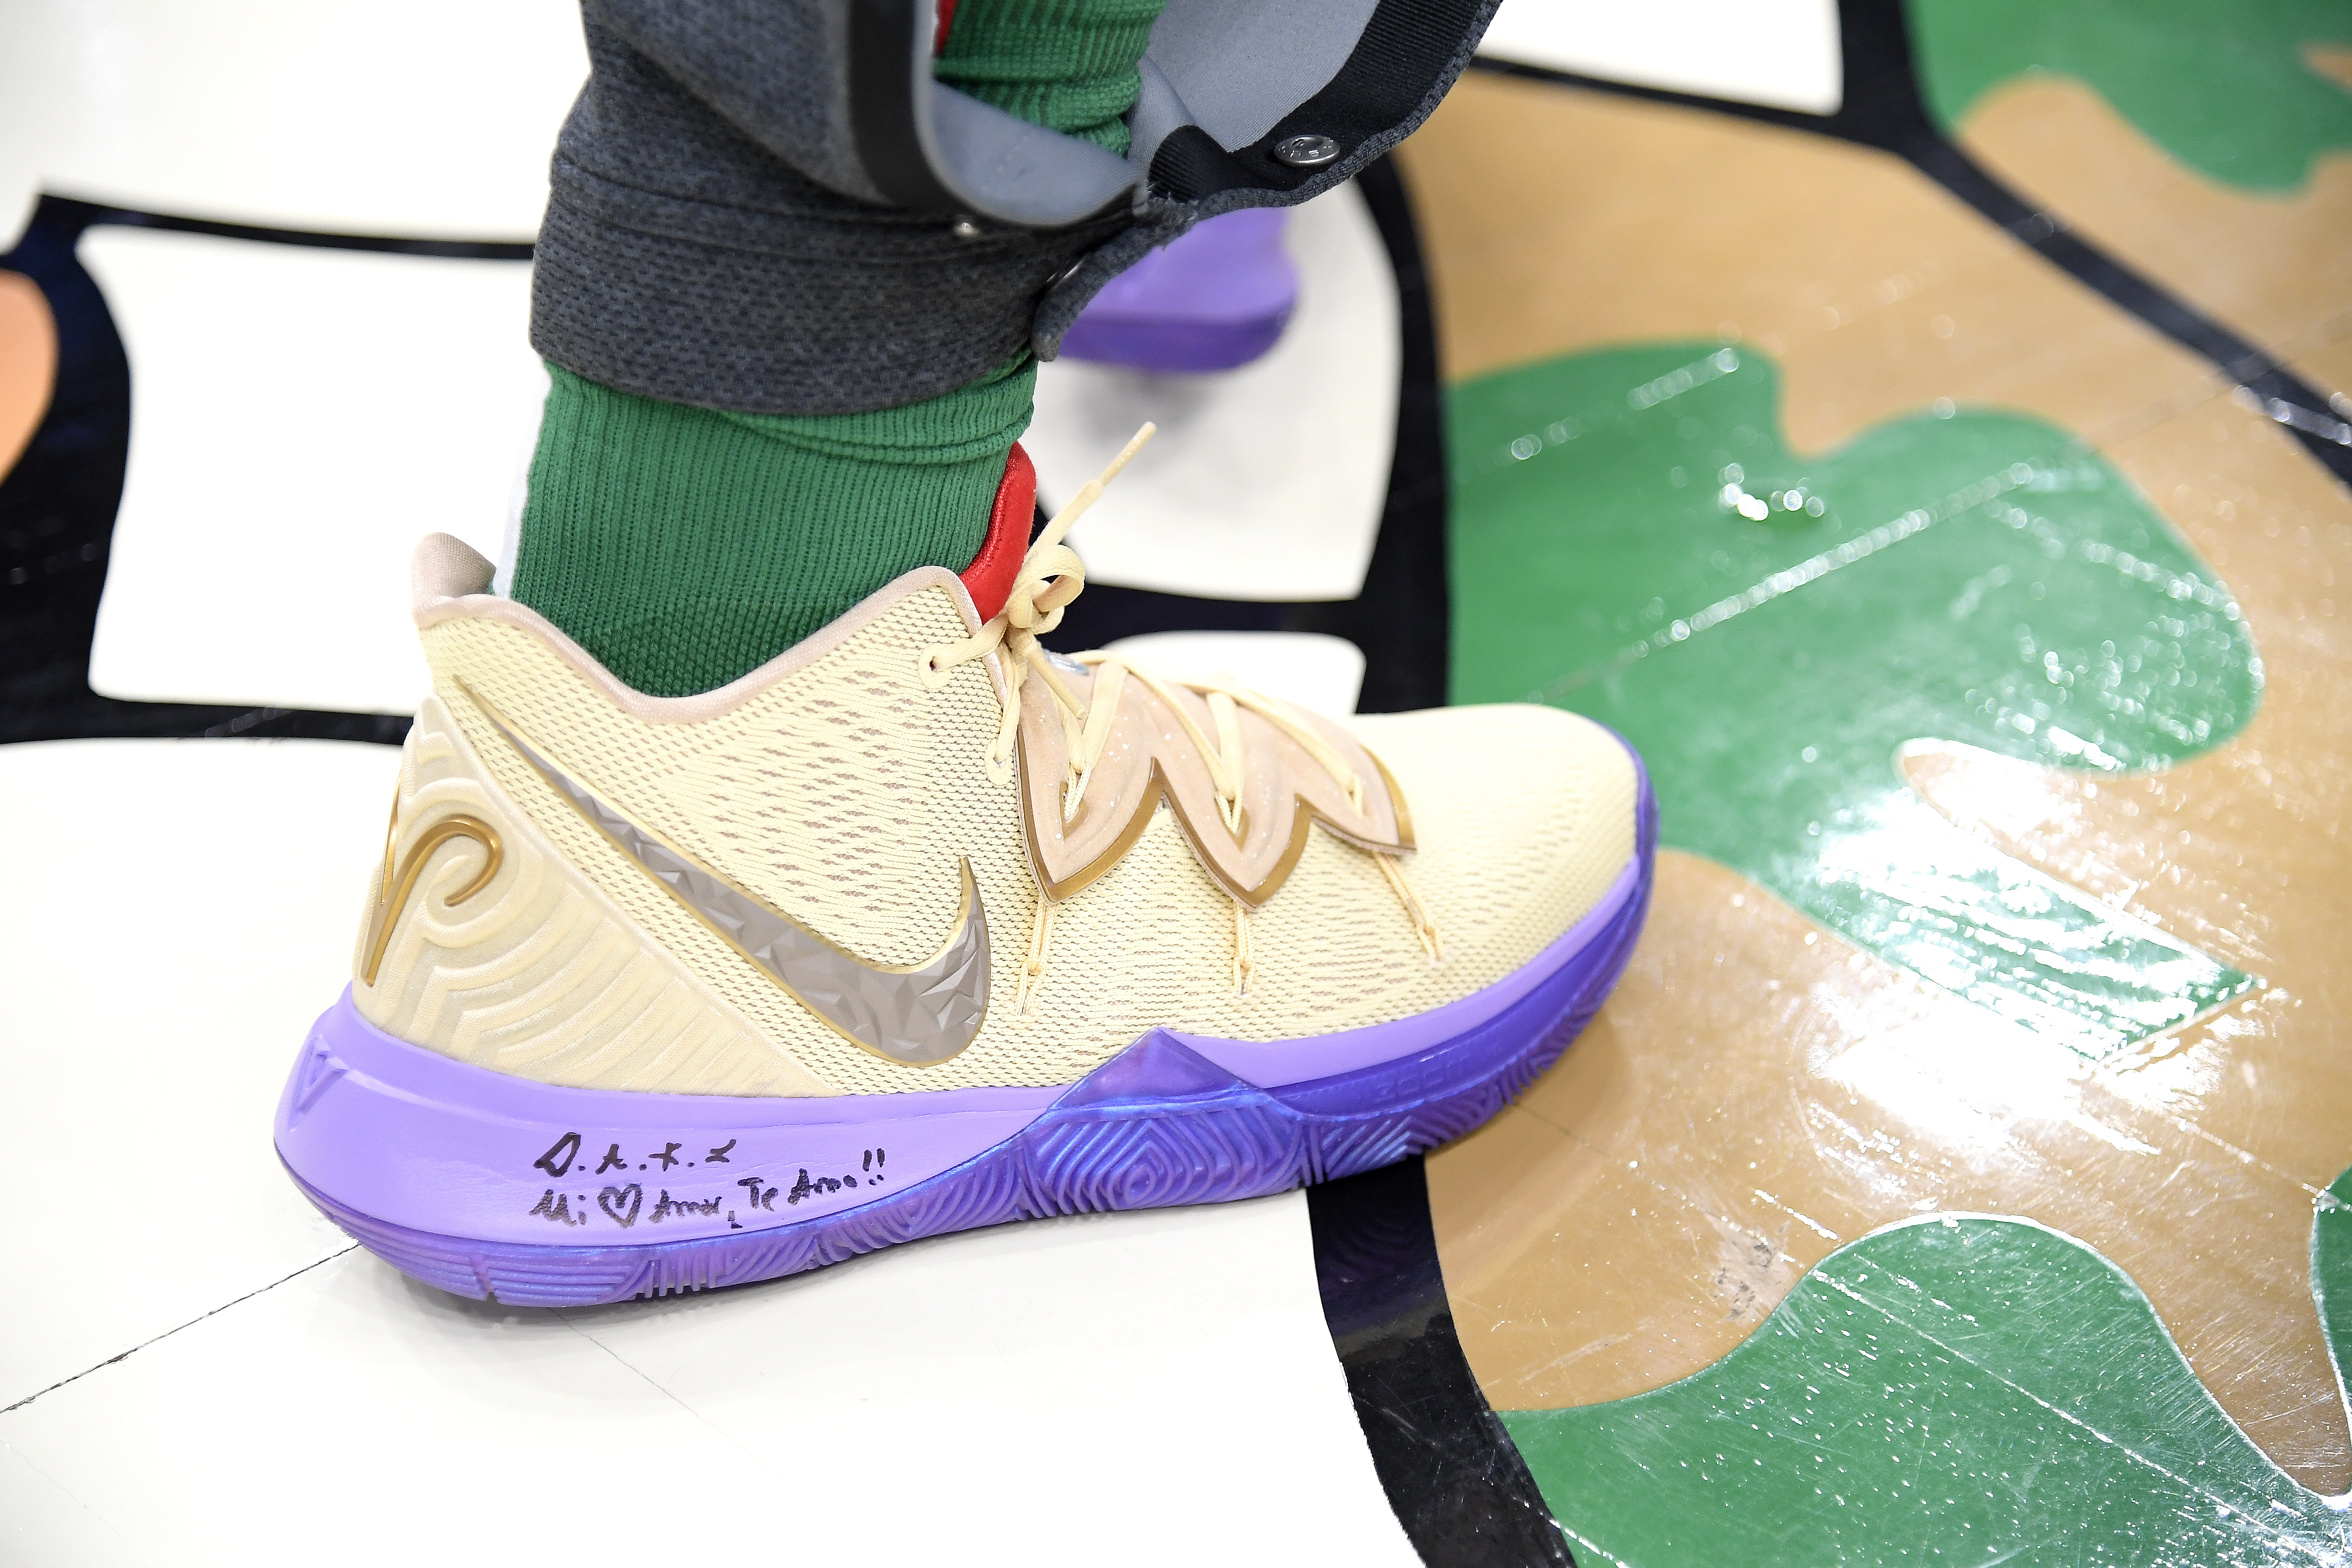 kyrie irving christmas shoes